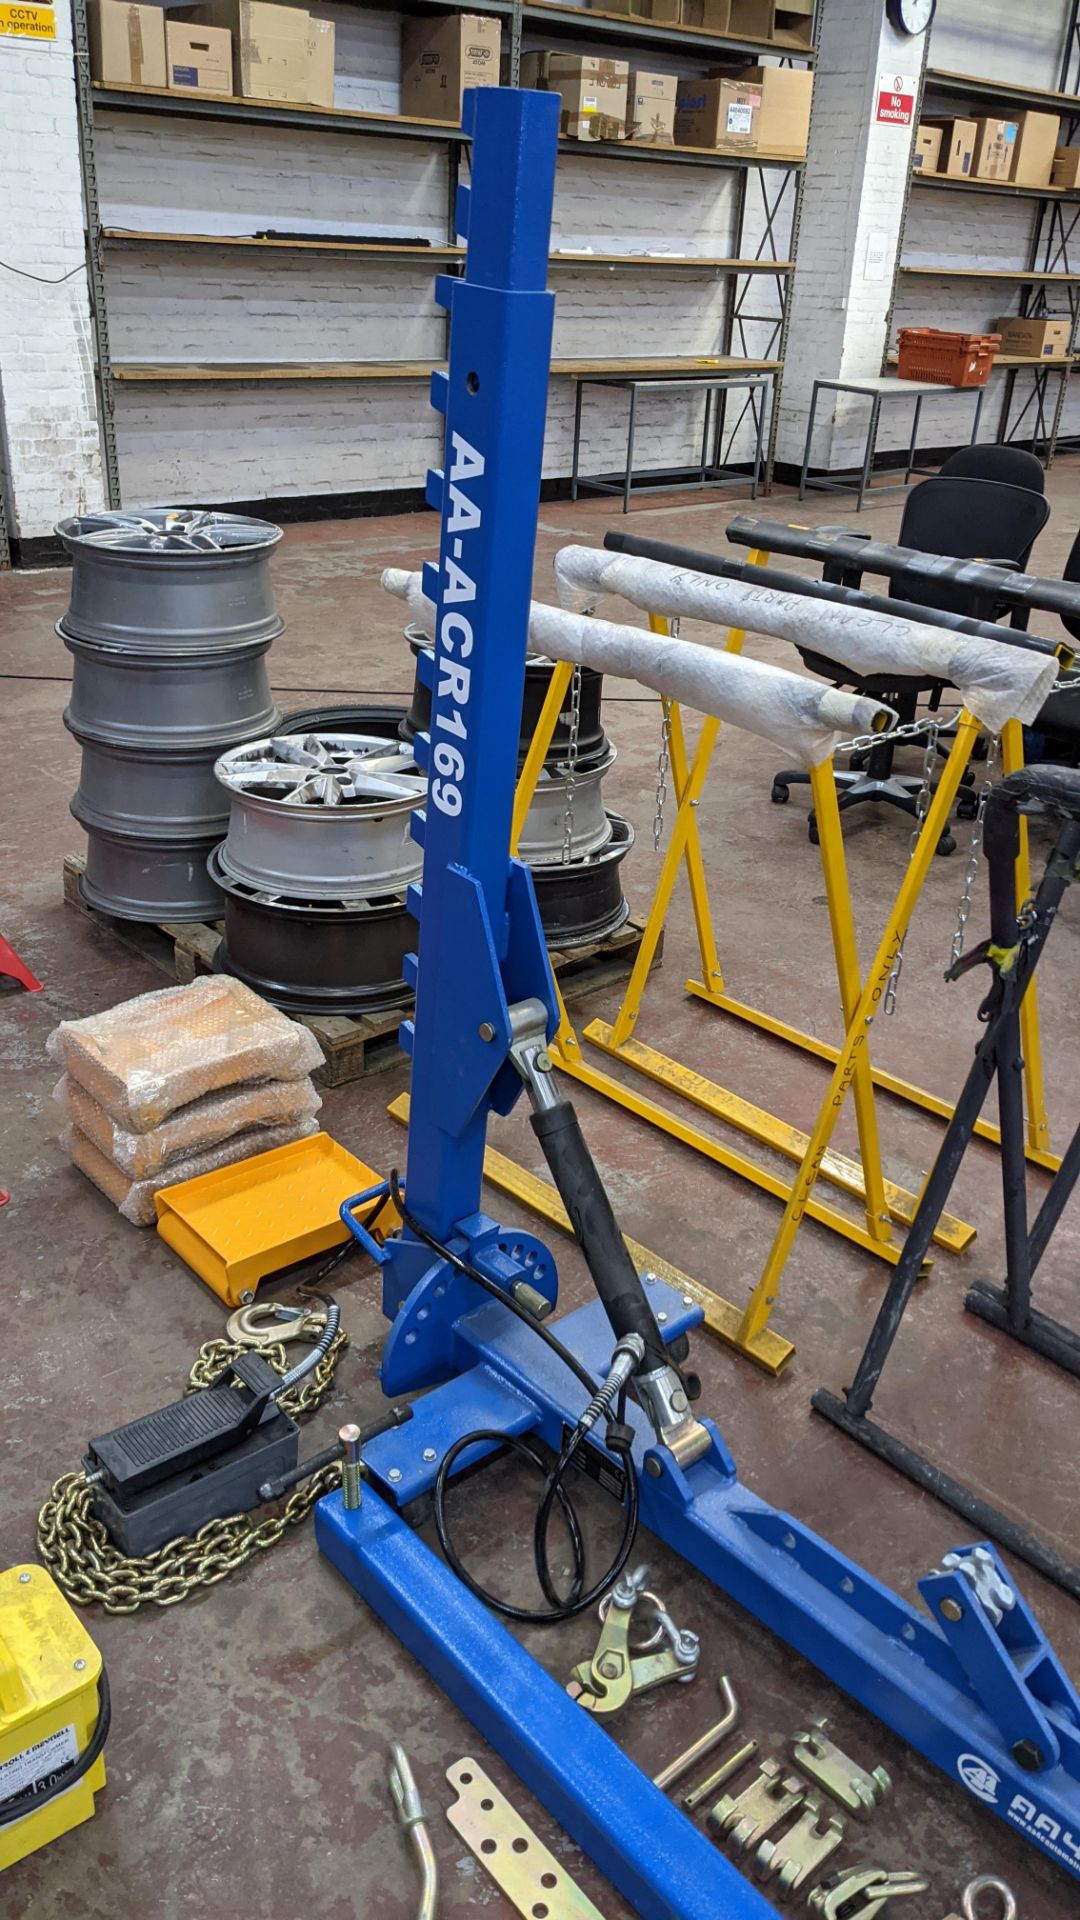 2019 AA4C auto repair bench model AA-ACR169. Please note this lot comprises the large blue metal fr - Image 9 of 32